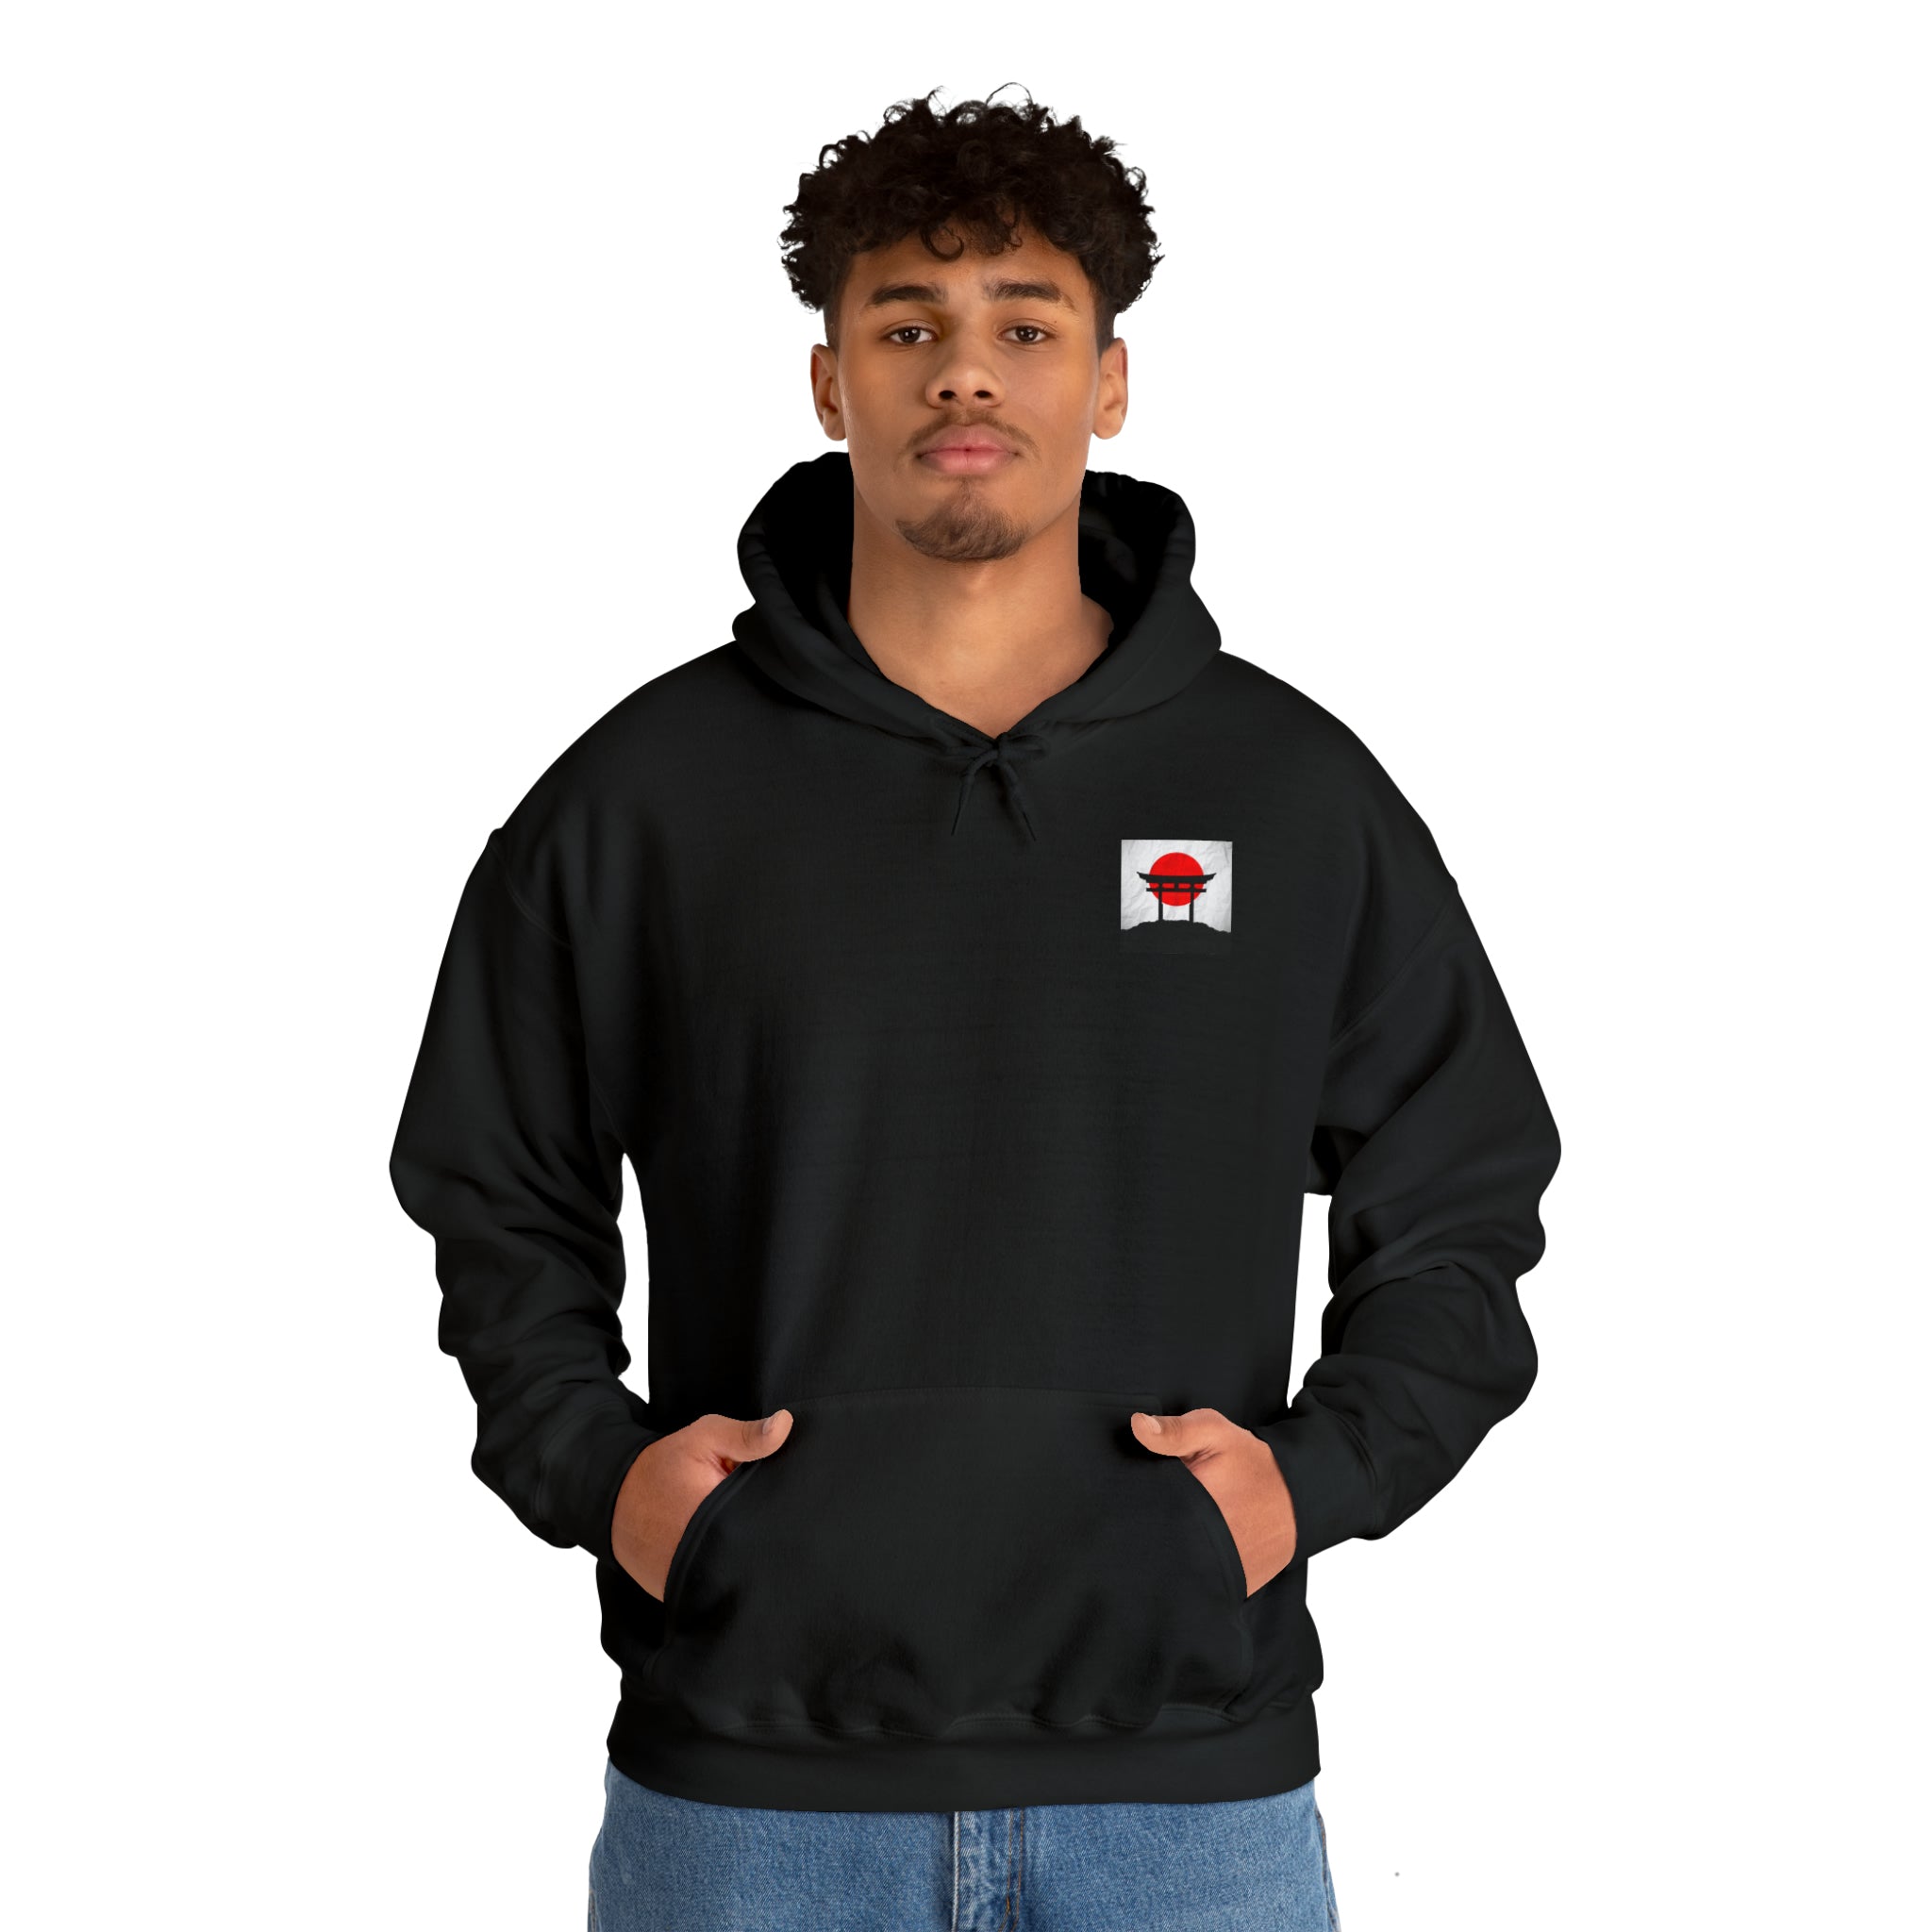 All access to your Anime merchandise Essential Hoodies